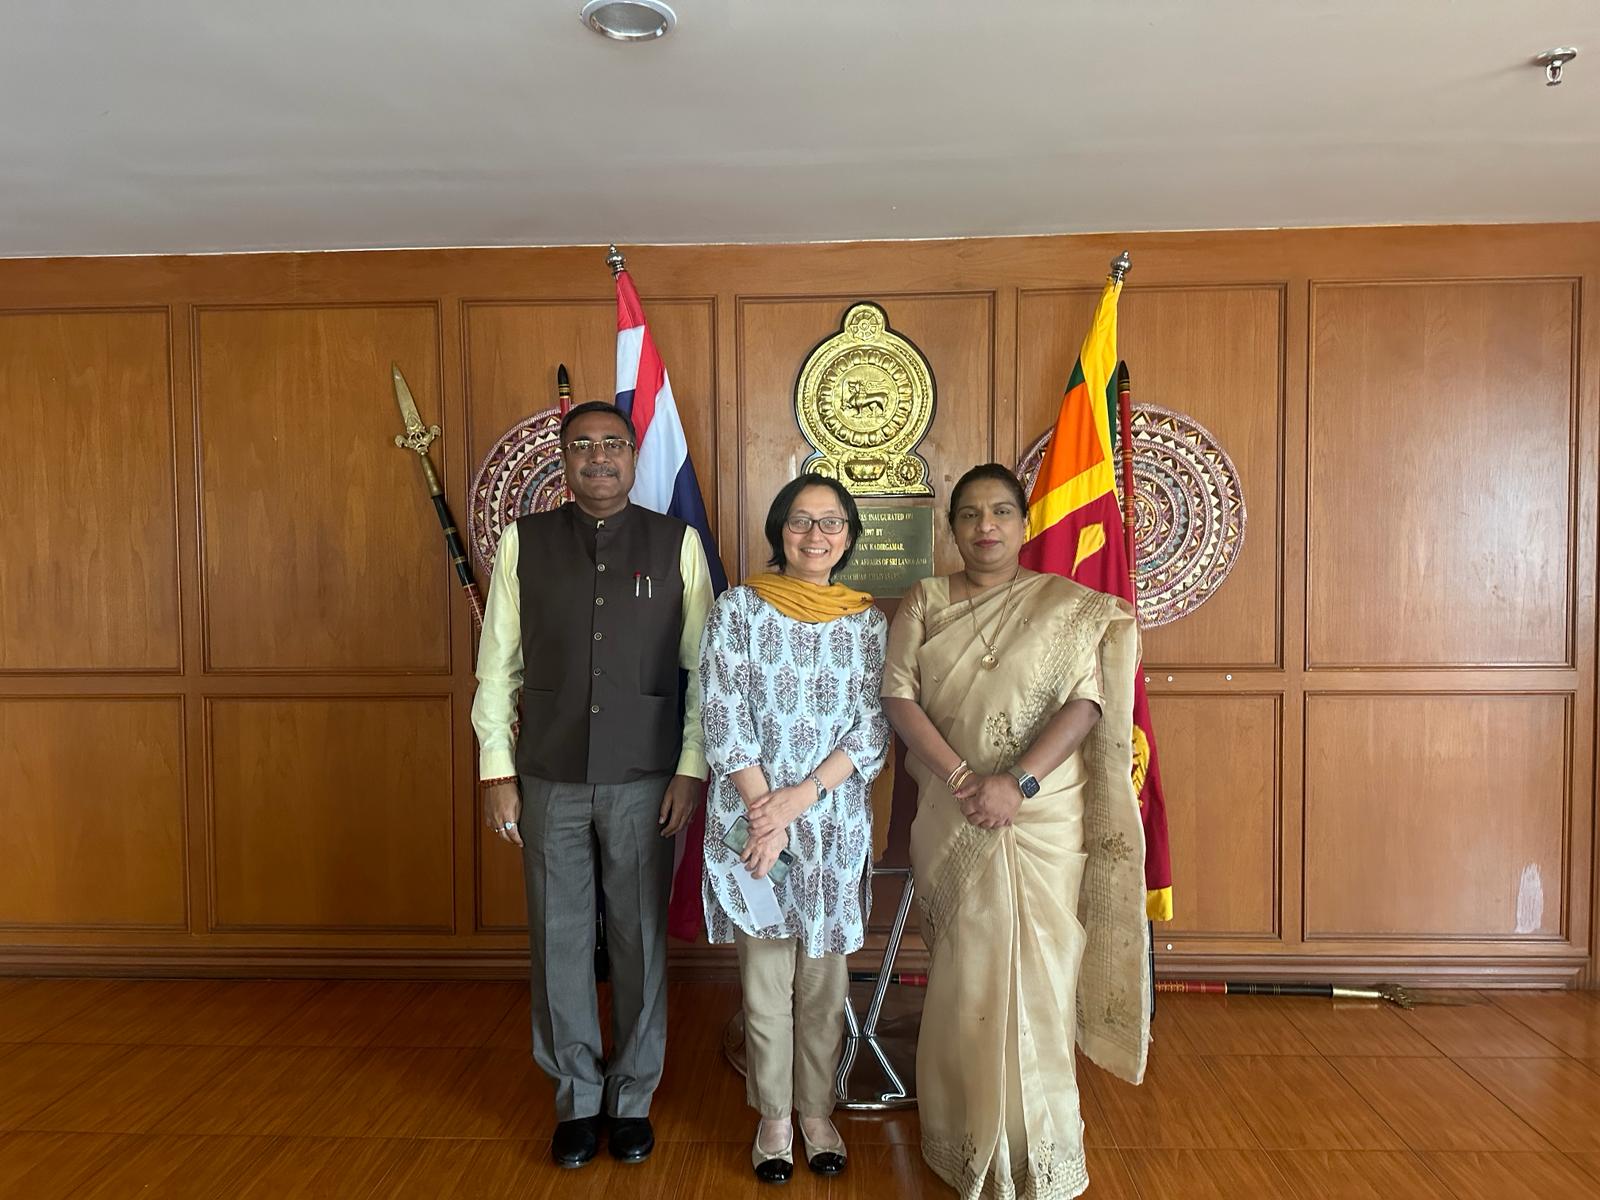 Director and Head, UNESCAP- Sub regional Office for South and South-West Asia (SSWA) in New Delhi, Mikiko Tanaka paid a courtesy call on Ambassador of Sri Lanka to the Kingdom of Thailand and Permanent Representative to UNESACP